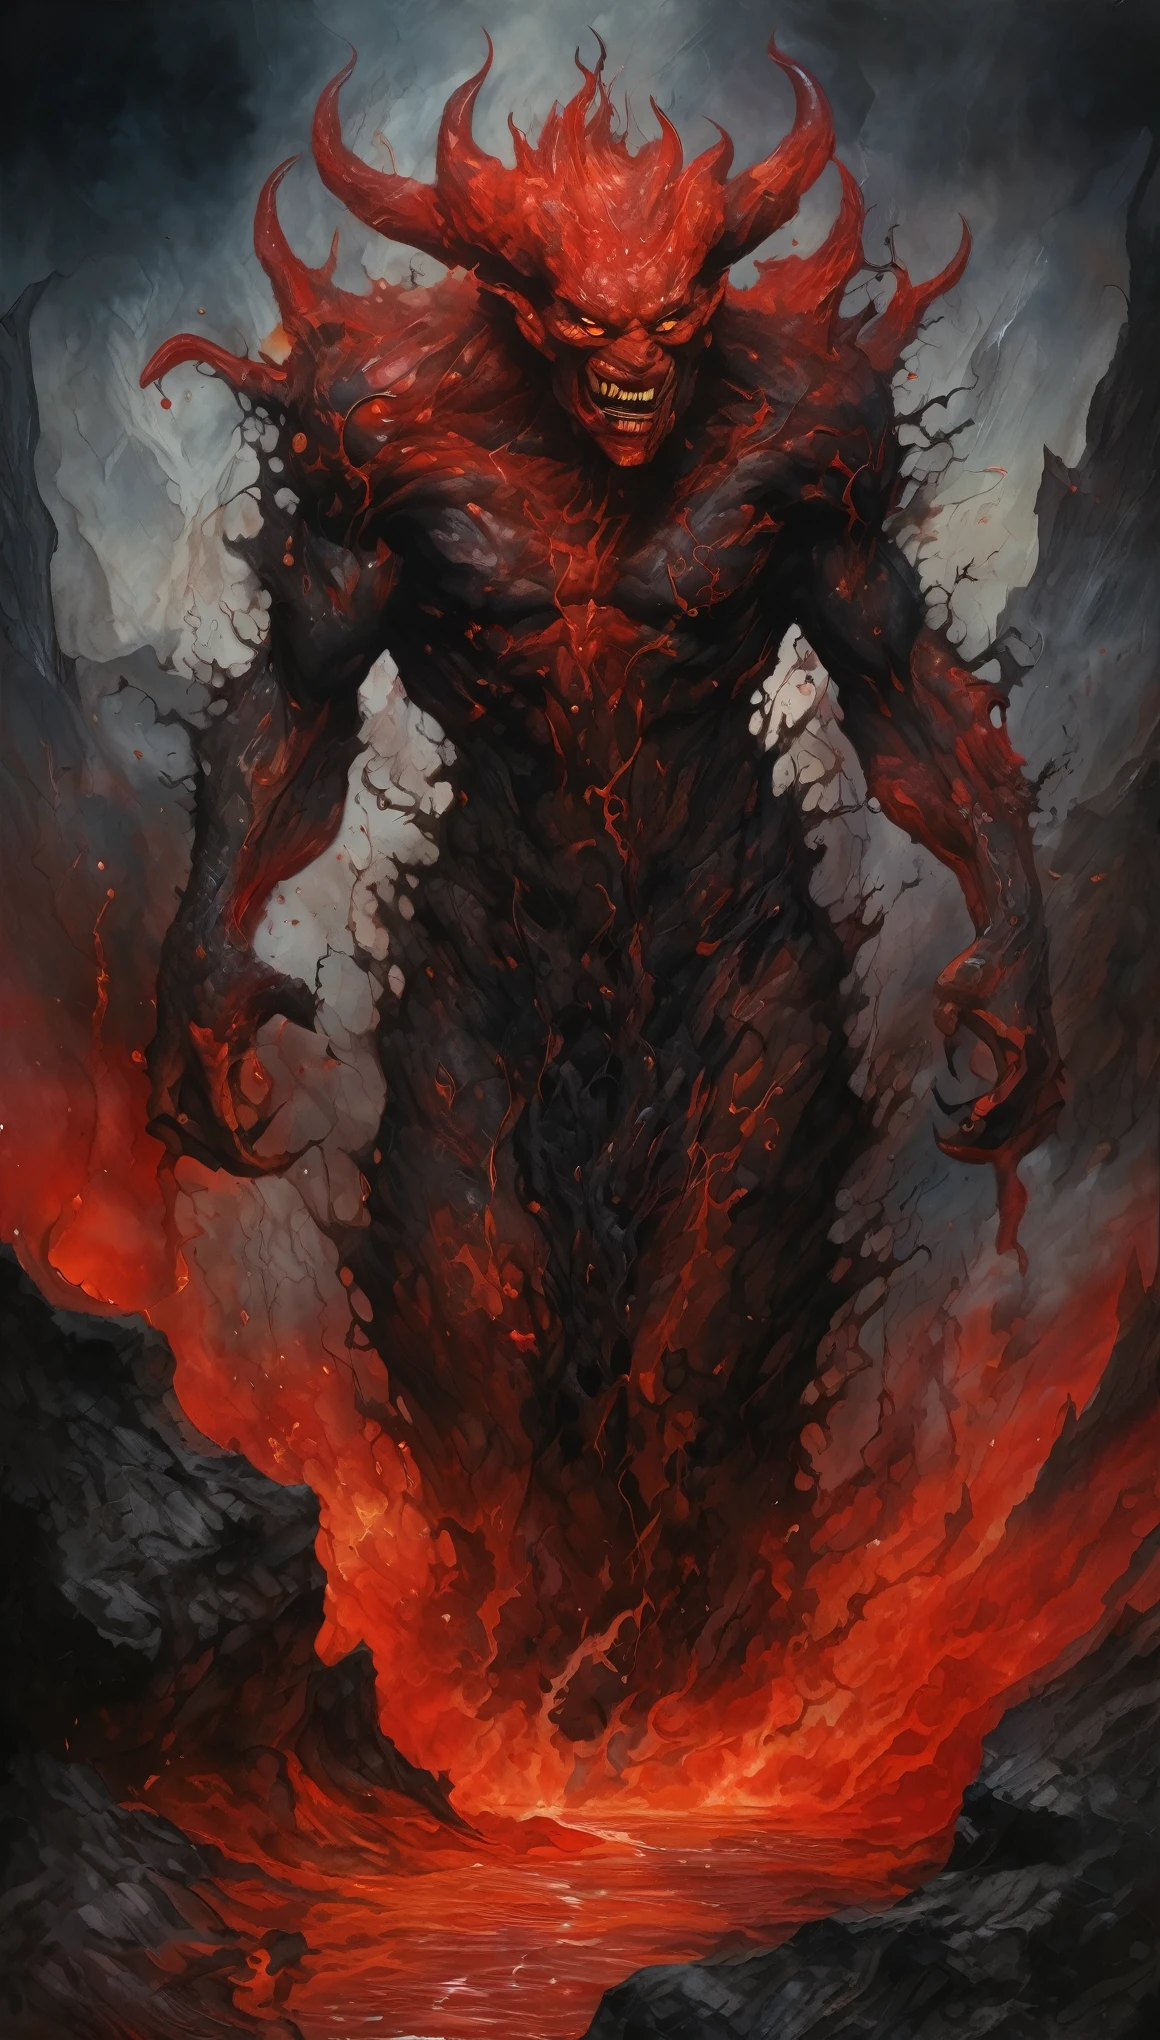 fusion of oil painting and watercolor painting, best quality, super fine, 16k, incredibly absurdres, extremely detailed, delicate and dynamic, dark horror fantasy, darkness, demon muddy with red lava, lava overflowing from crack in the rock, gradually forming into the shape of demon, mushy shape, demon made of lava, like hell